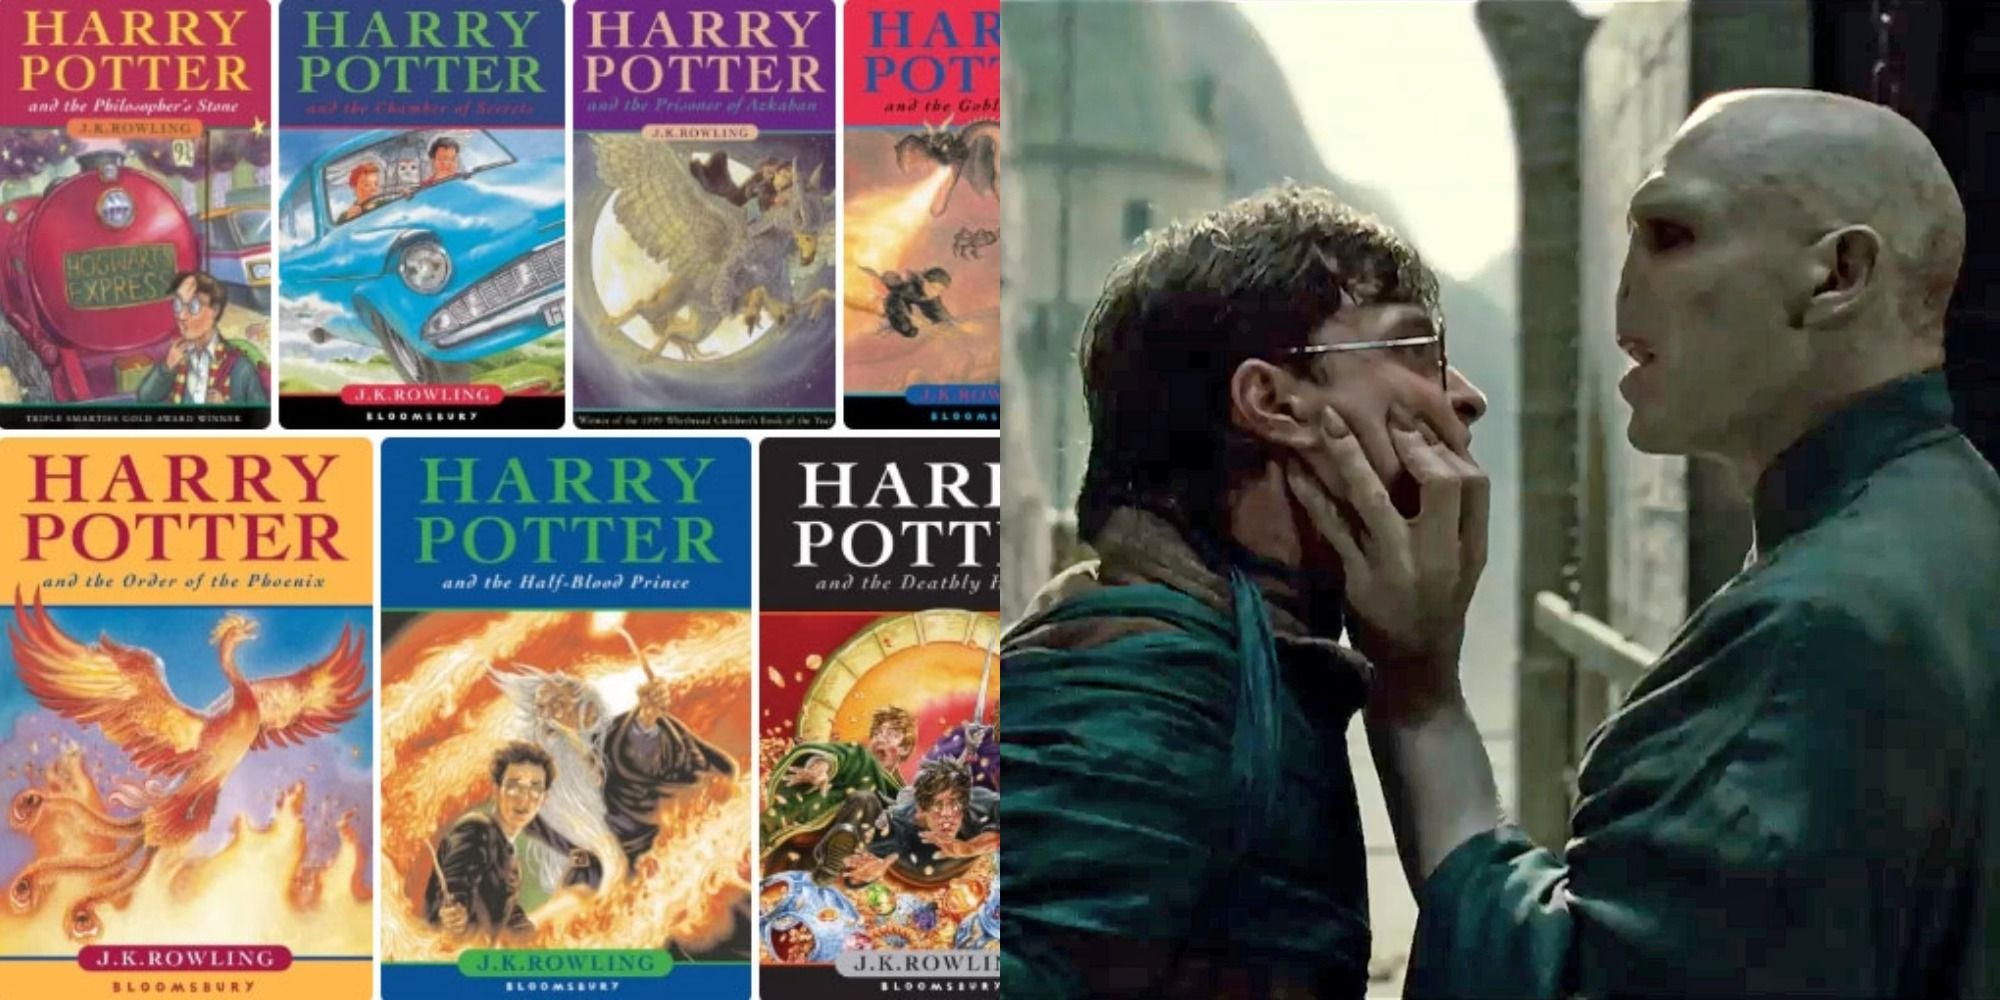 Split image of Harry Potter book covers and Harry & Voldemort's final showdown